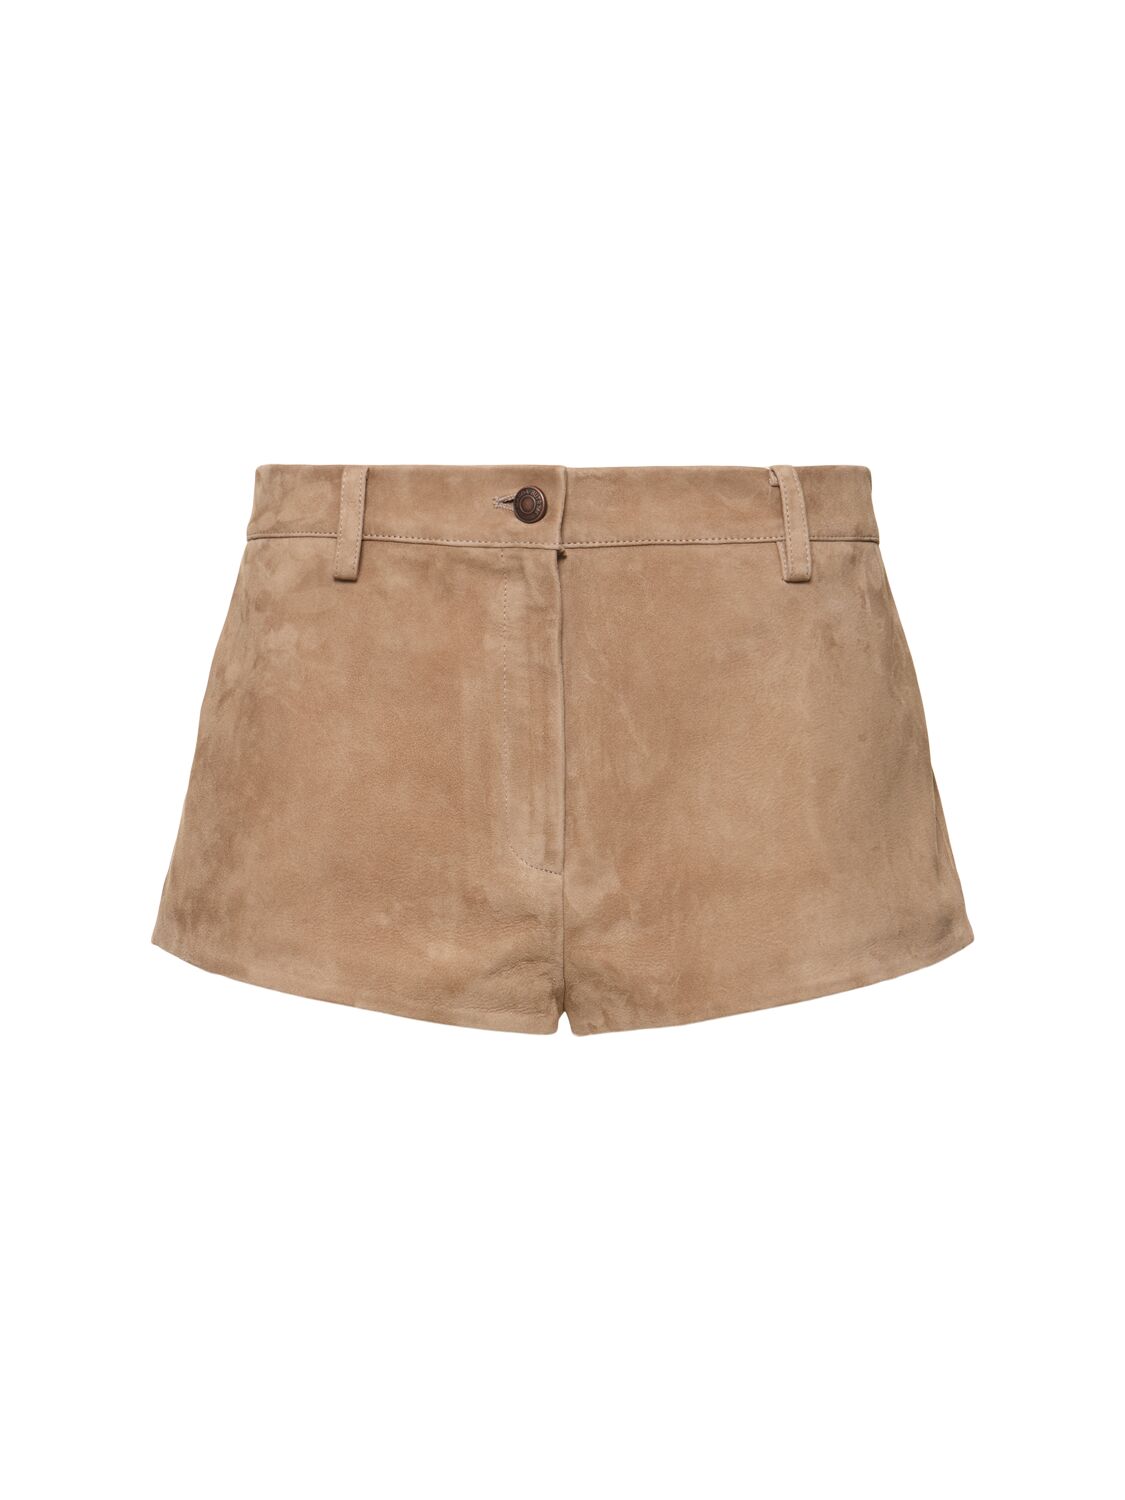 Image of Suede Shorts